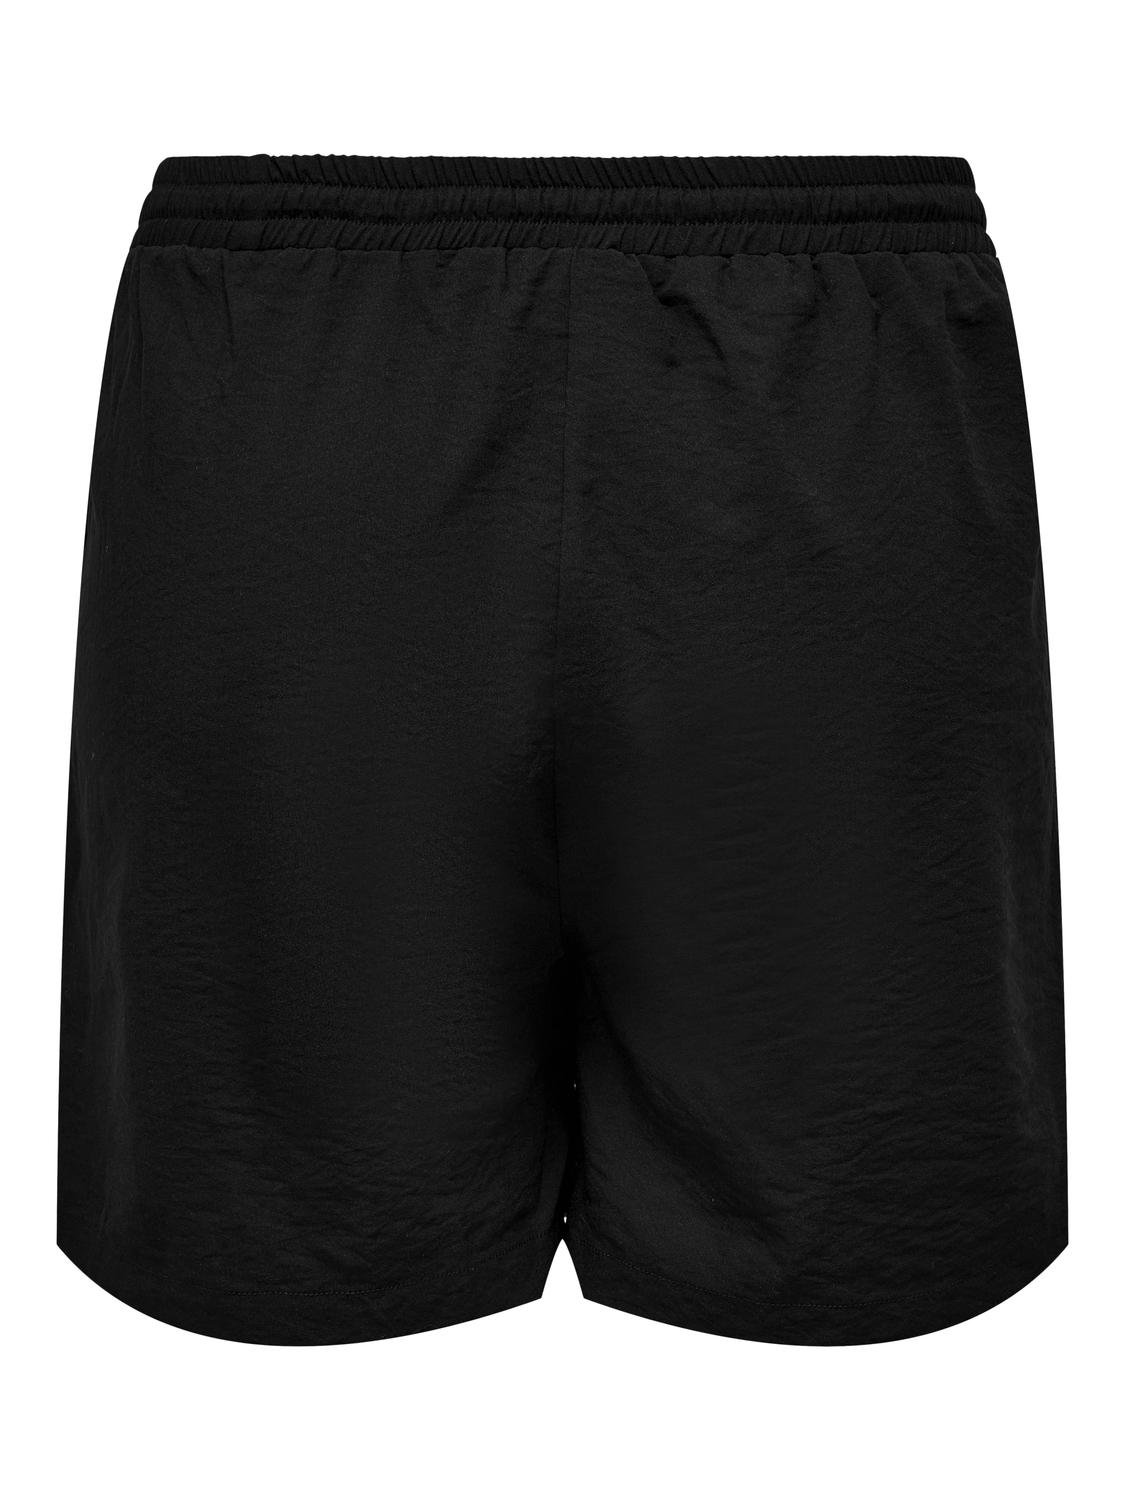 ONLY Normal passform Shorts -Black - 15312292